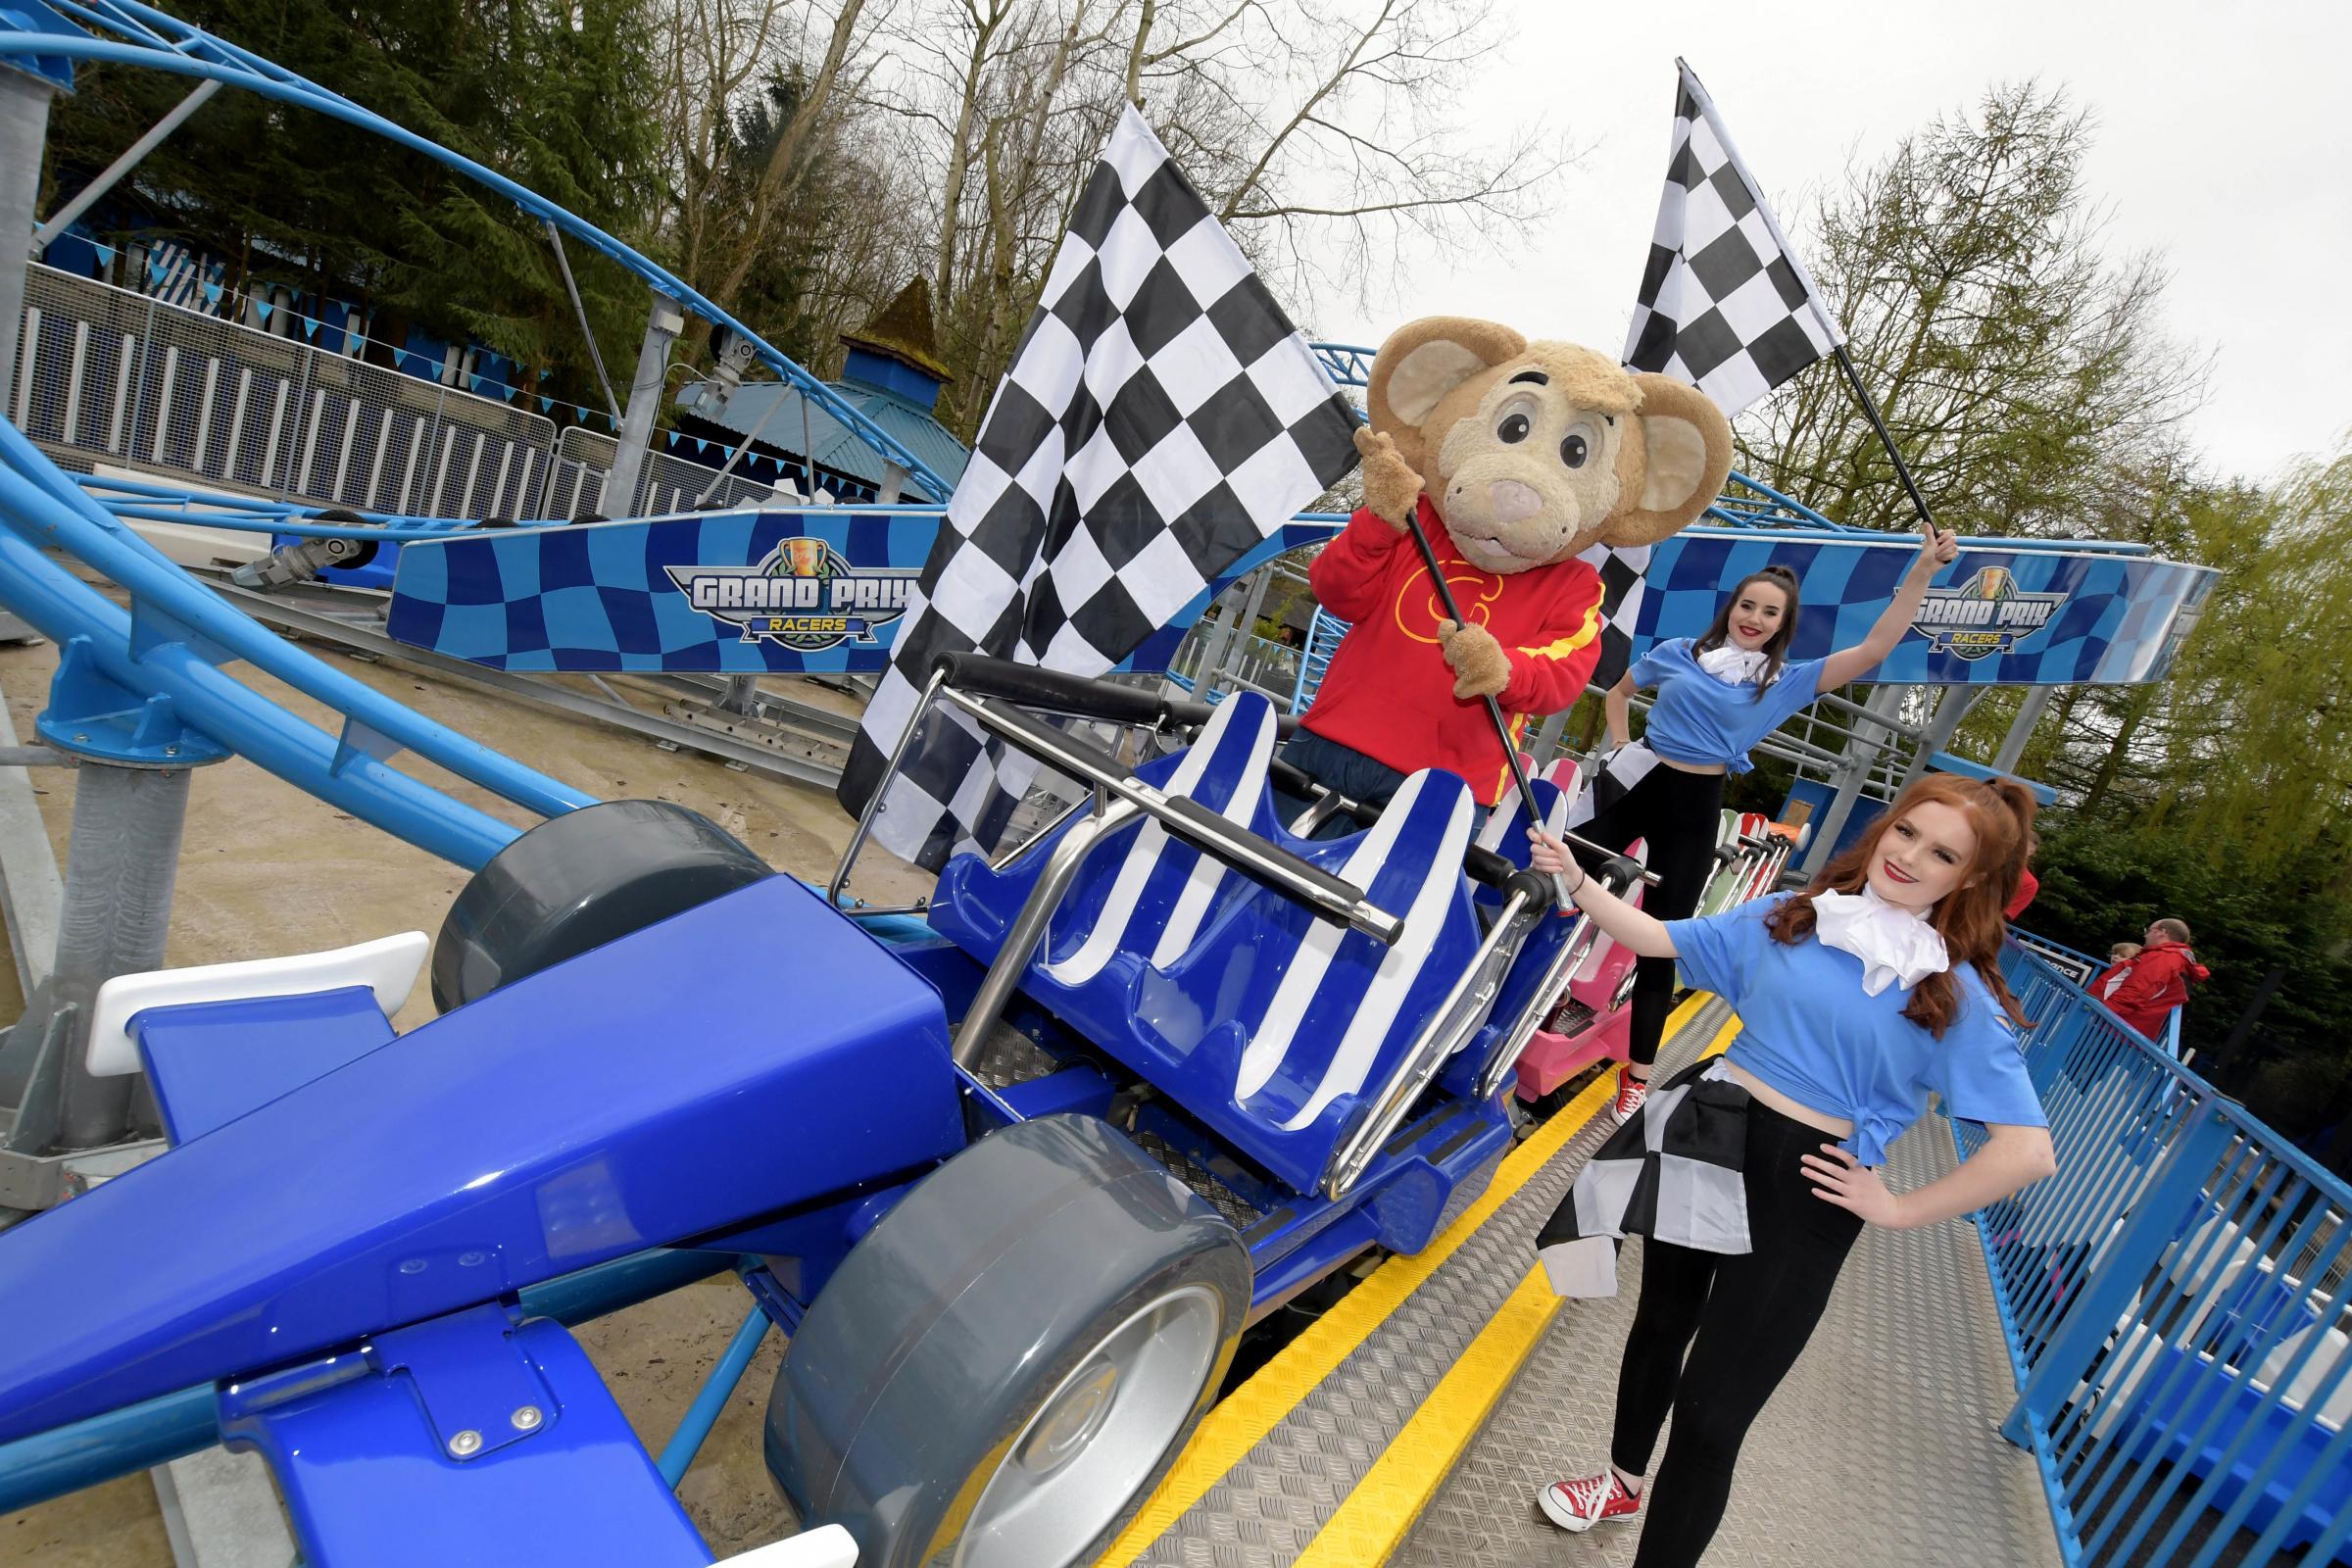 The new rides at Gullivers launched at the weekend